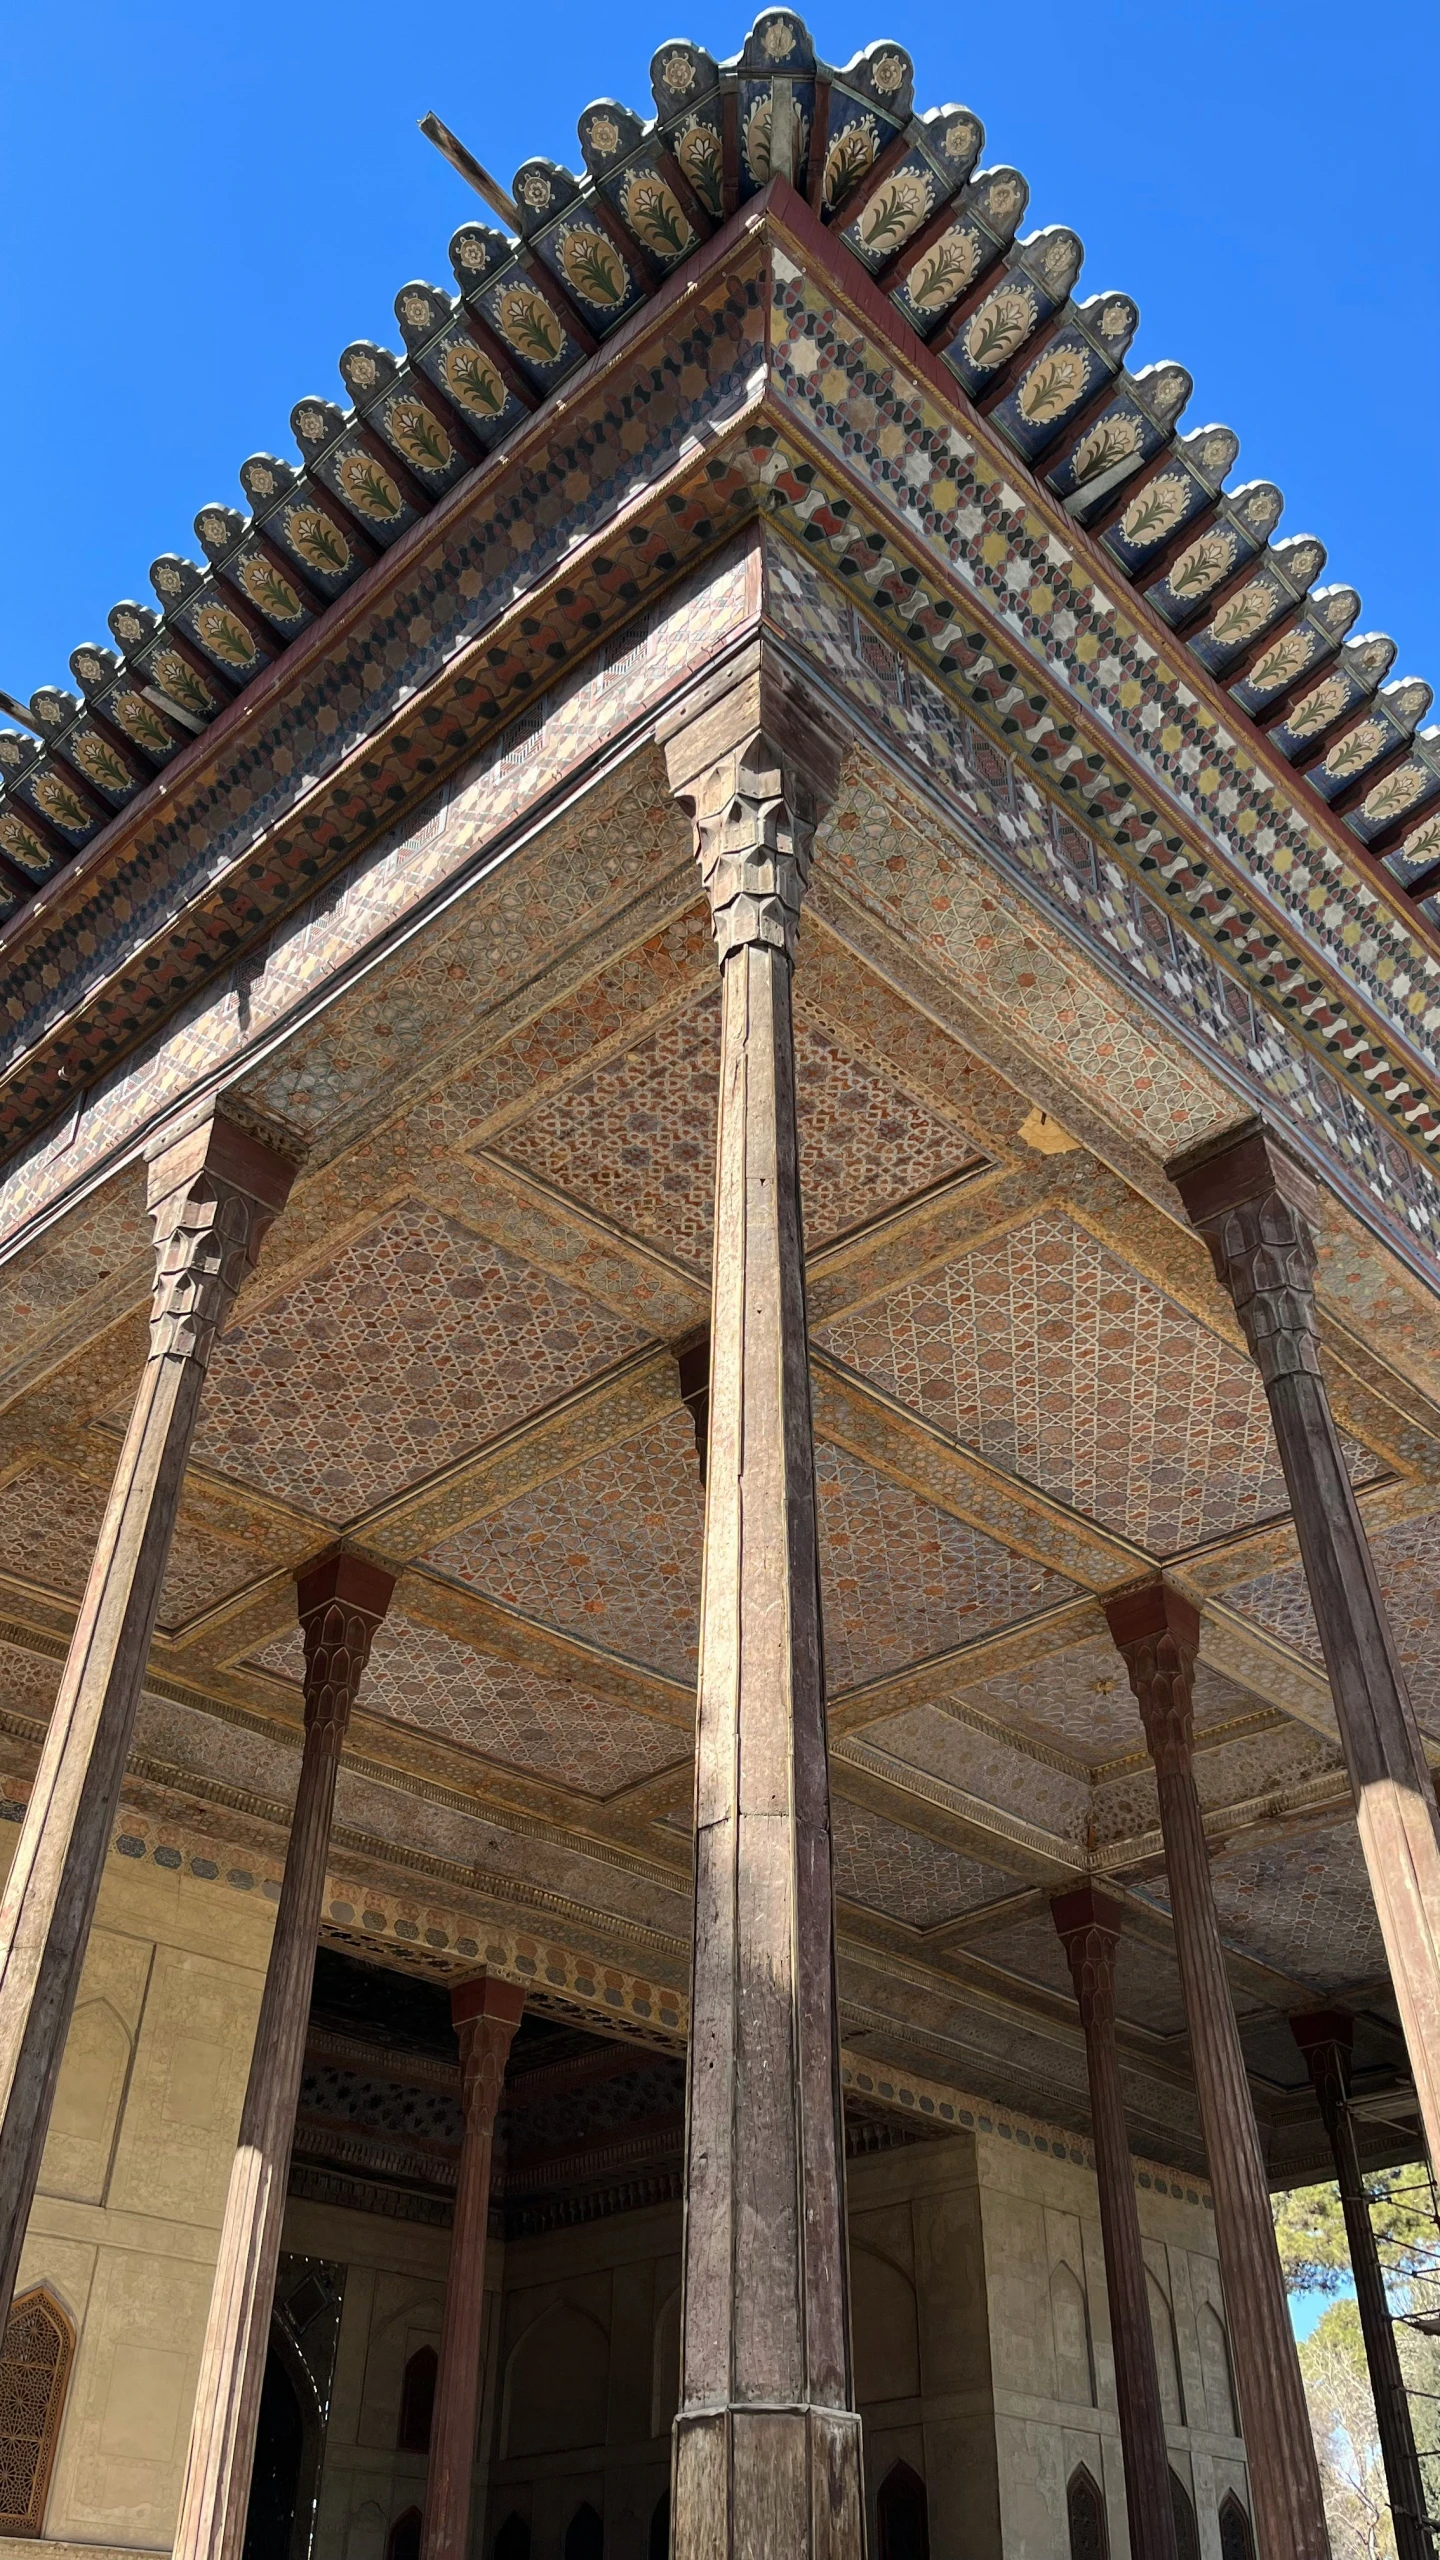 a beautiful roof structure in an old palace